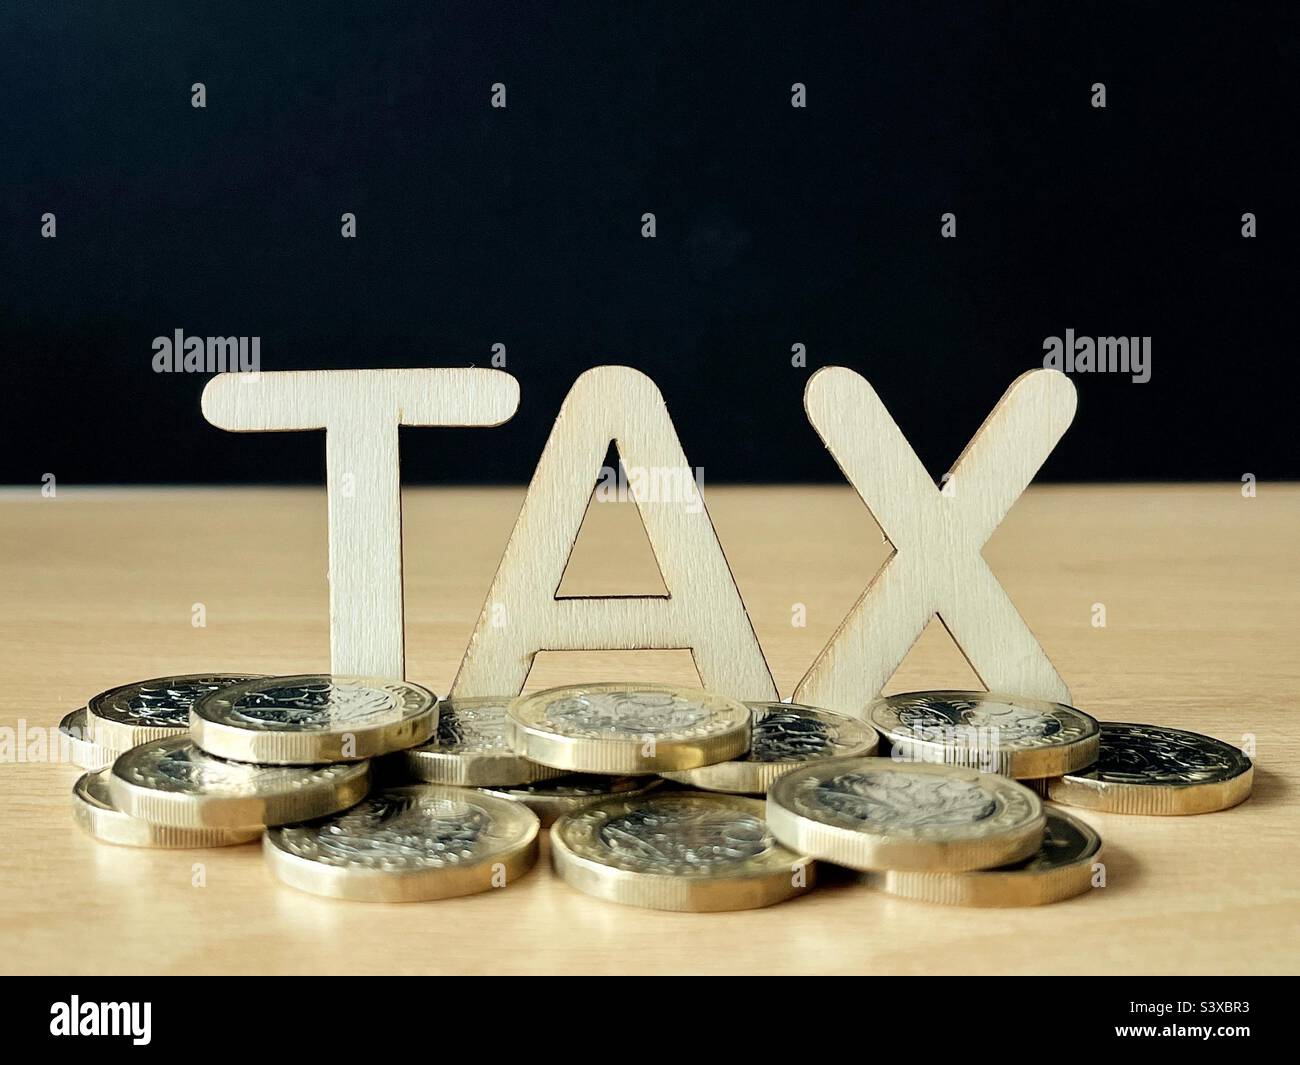 Tax in wooden letters surrounded by British one pound coins. Earnings and income concept. No people. Stock Photo